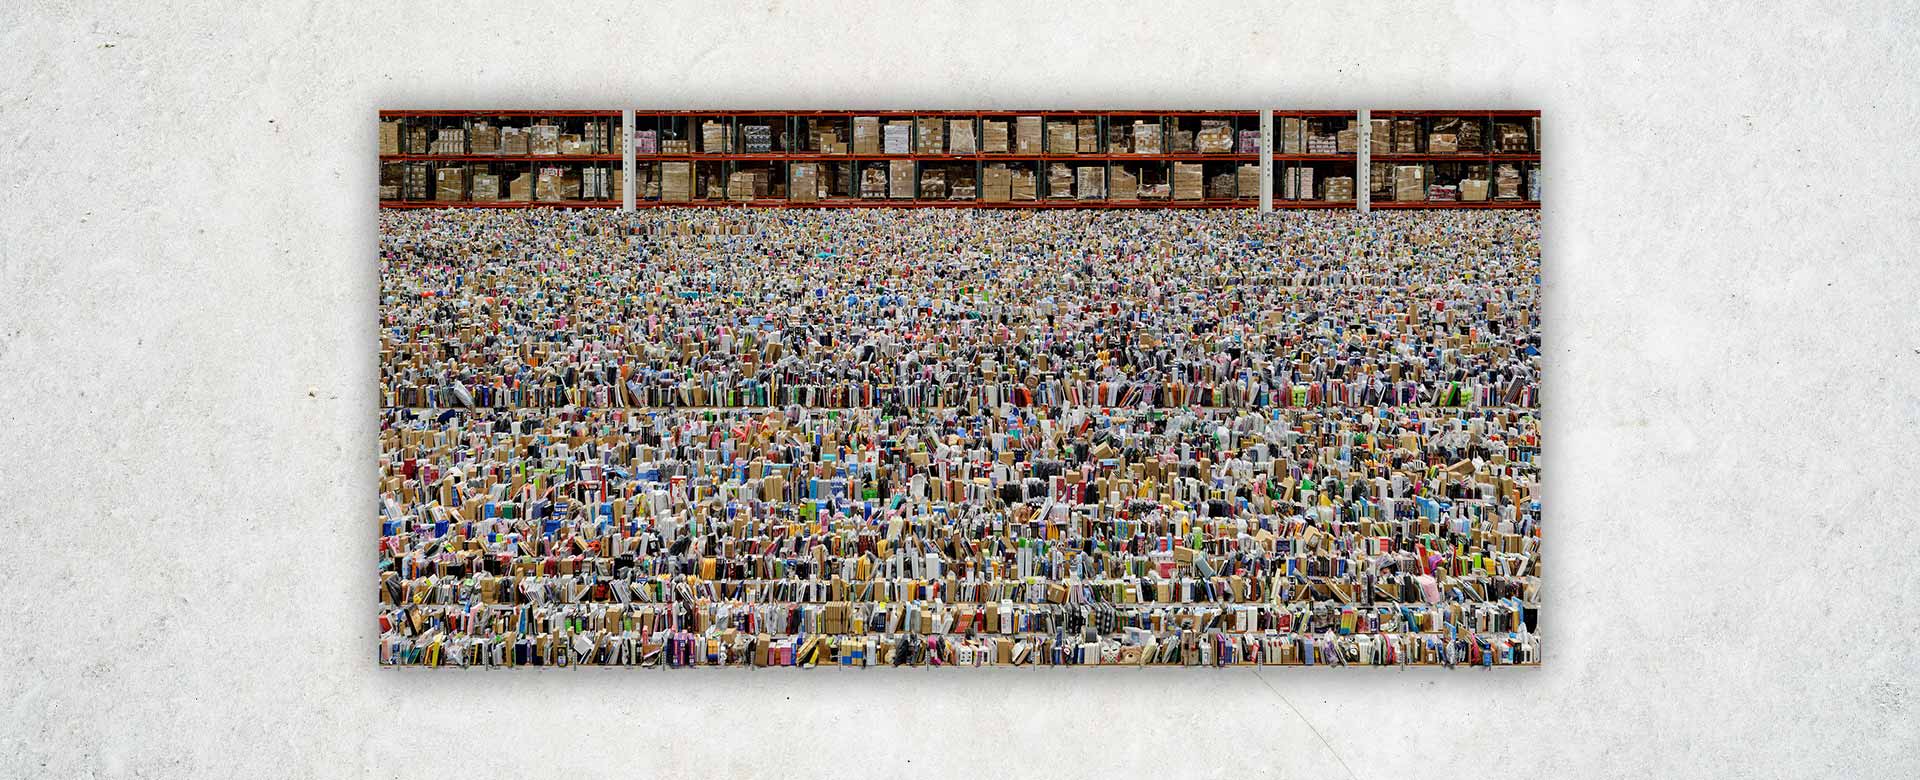 Andreas Gursky, Amazon , 2016 © ANDREAS GURSKY, by SIAE 2023 Courtesy: Sprüth Magers